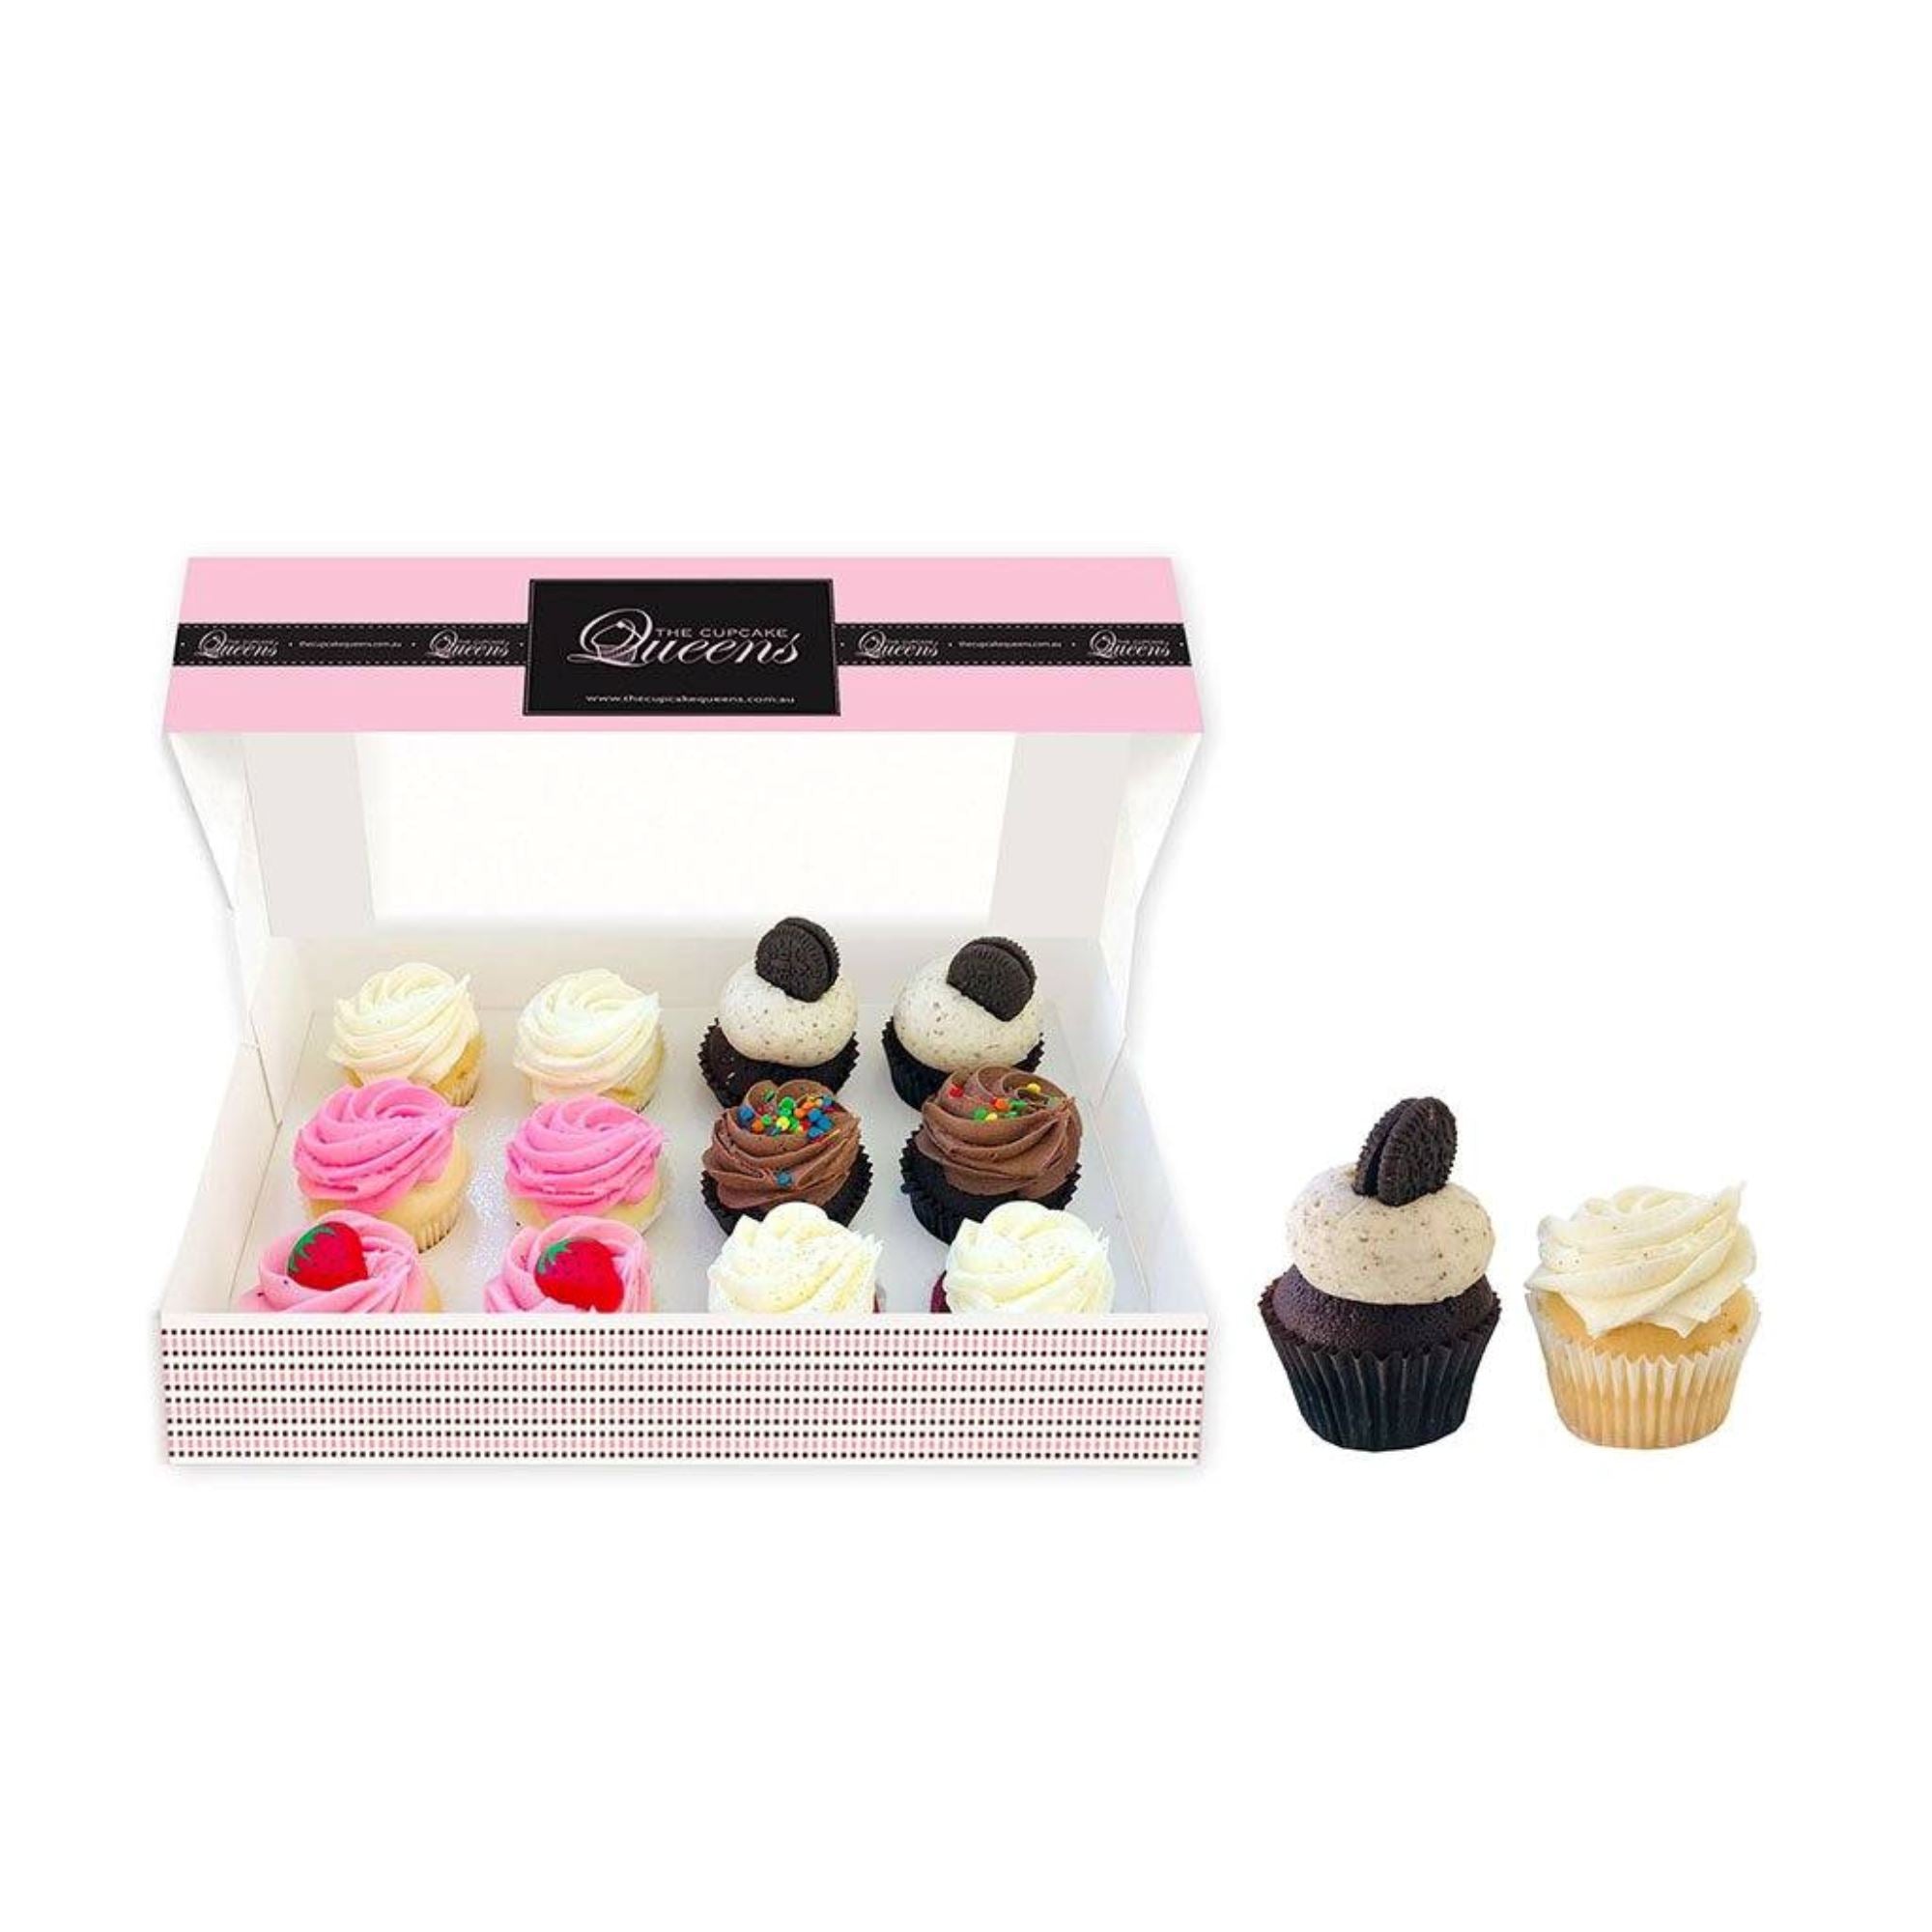 Mini Daily Favourites 12 Pack Cupcakes The Cupcake Queens 